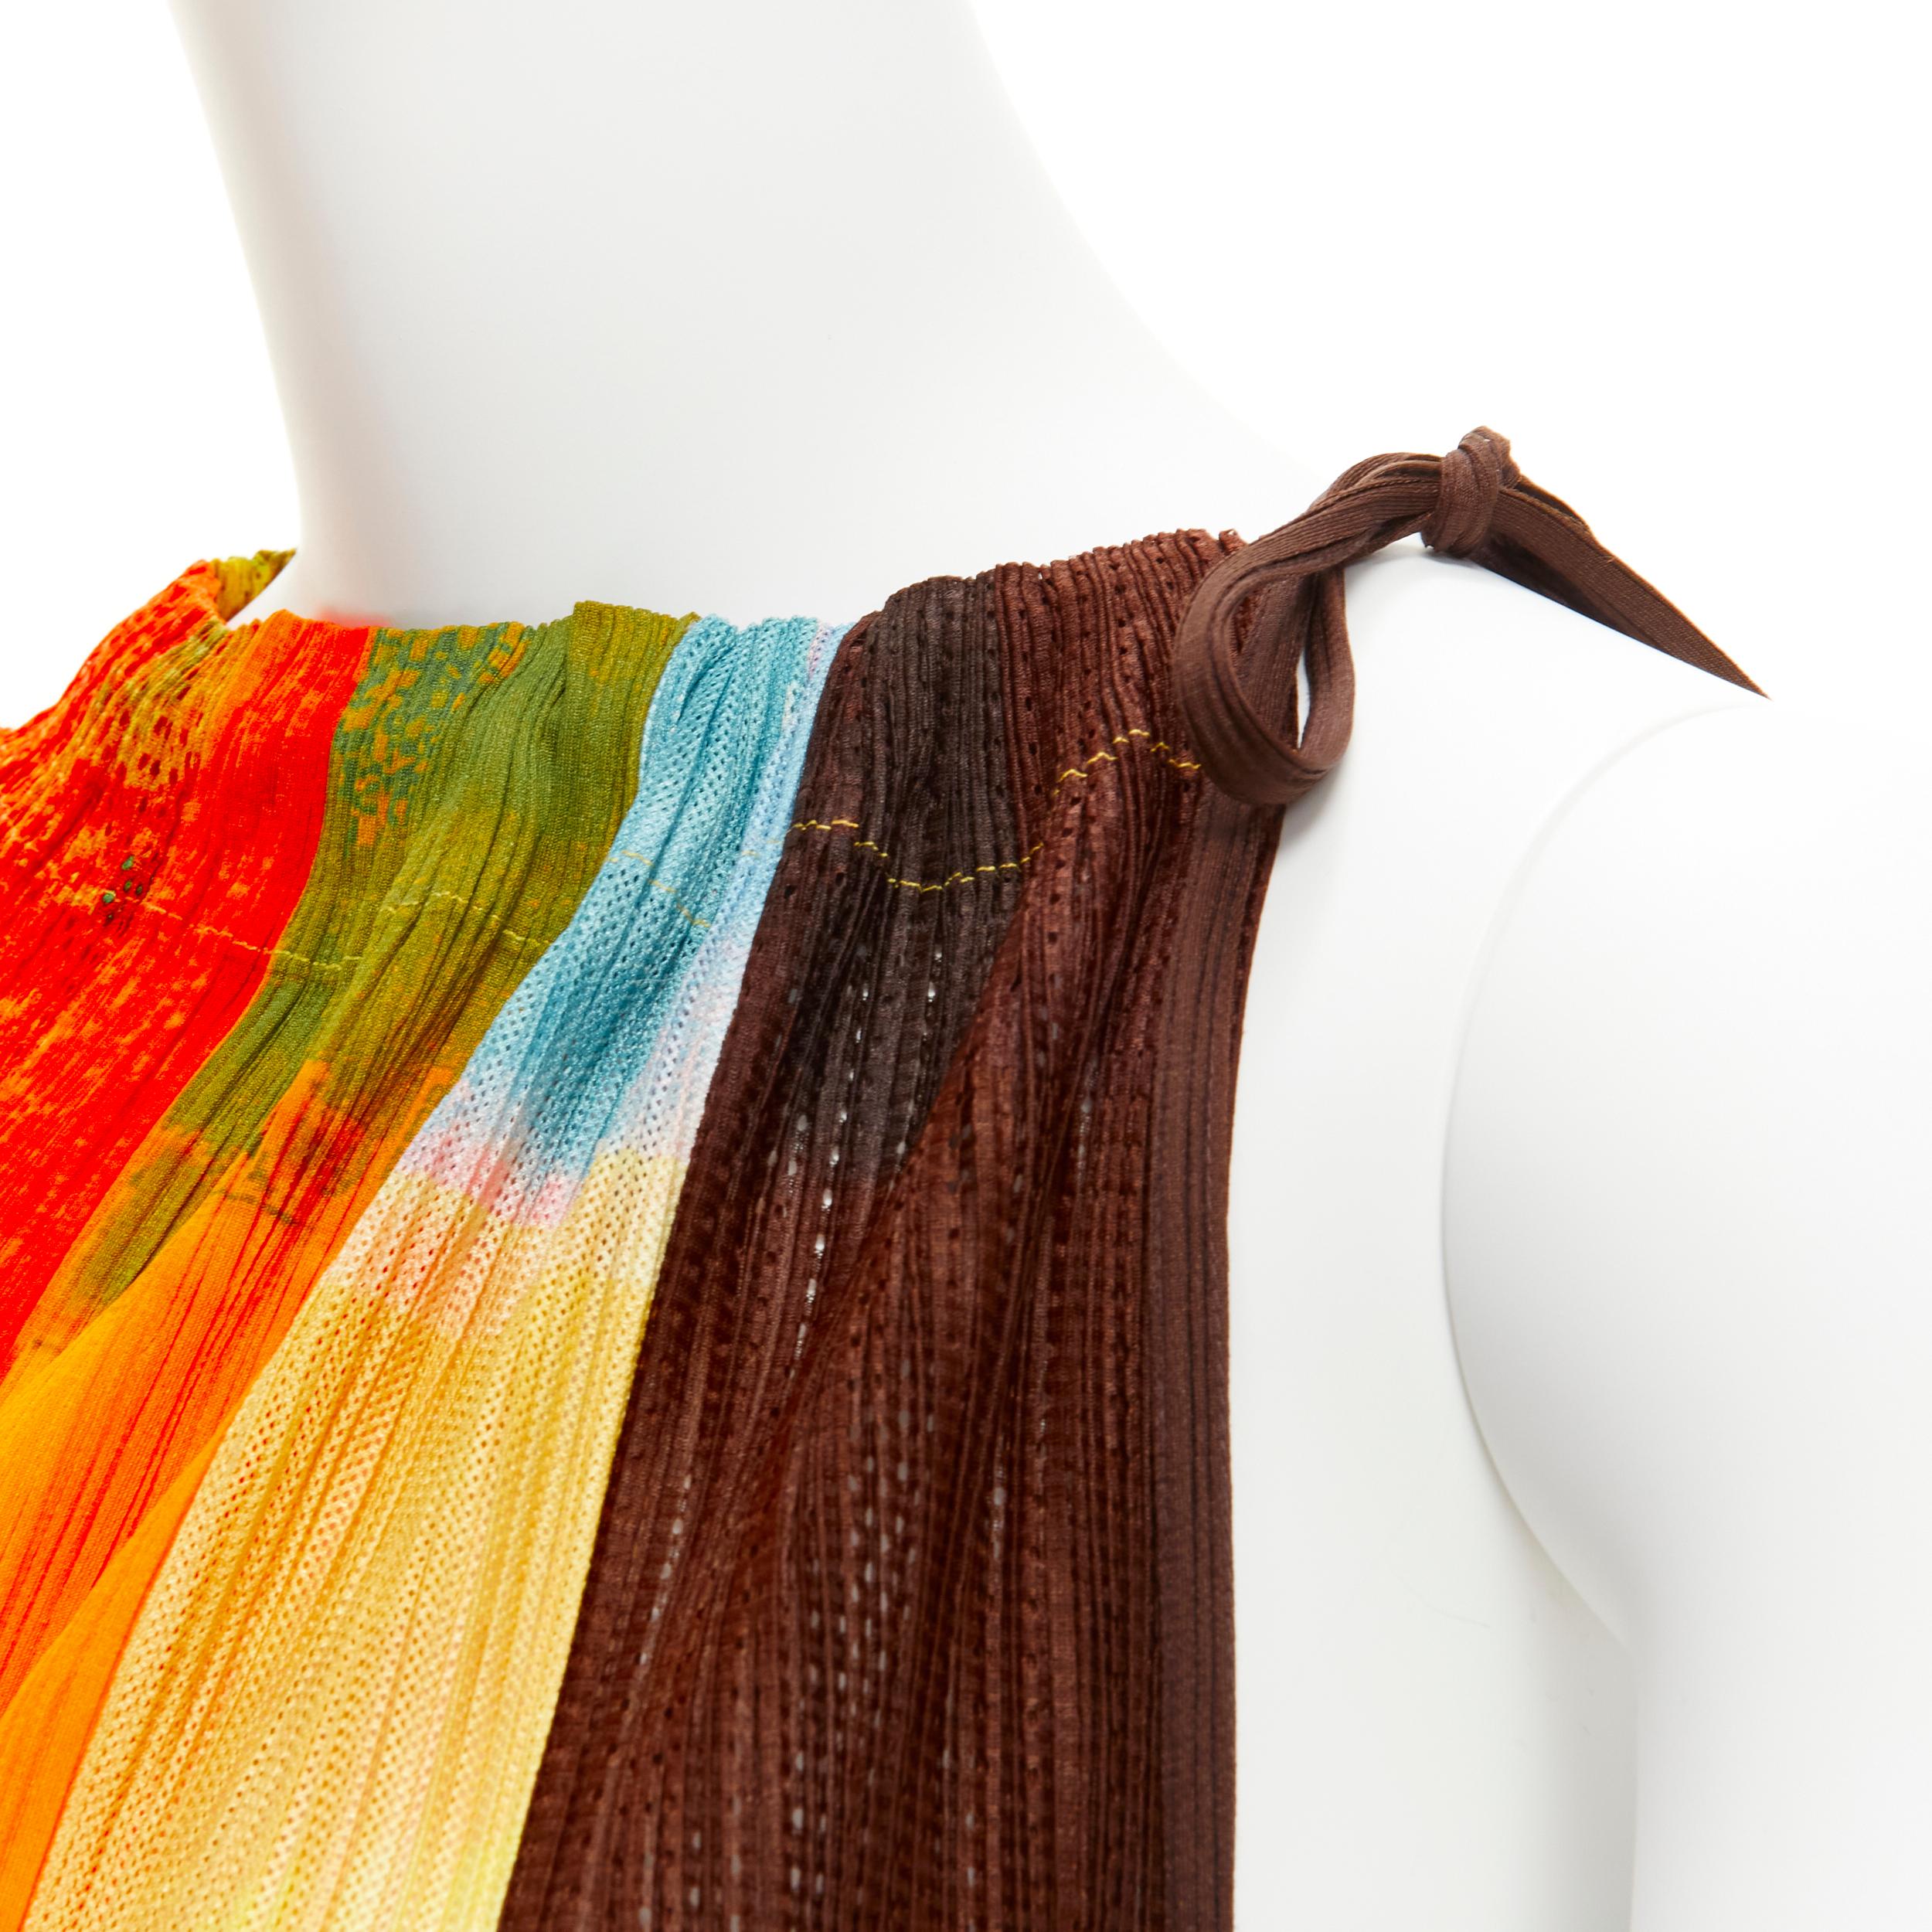 rare ISSEY MIYAKE PLEATS PLEASE multicolour abstract print drawstring paperbag vest top
Reference: TGAS/D00048
Brand: Issey Miyake
Collection: Pleats Please
Material: Polyester
Color: Multicolour
Pattern: Abstract
Closure: Tie Neck
Extra Details: